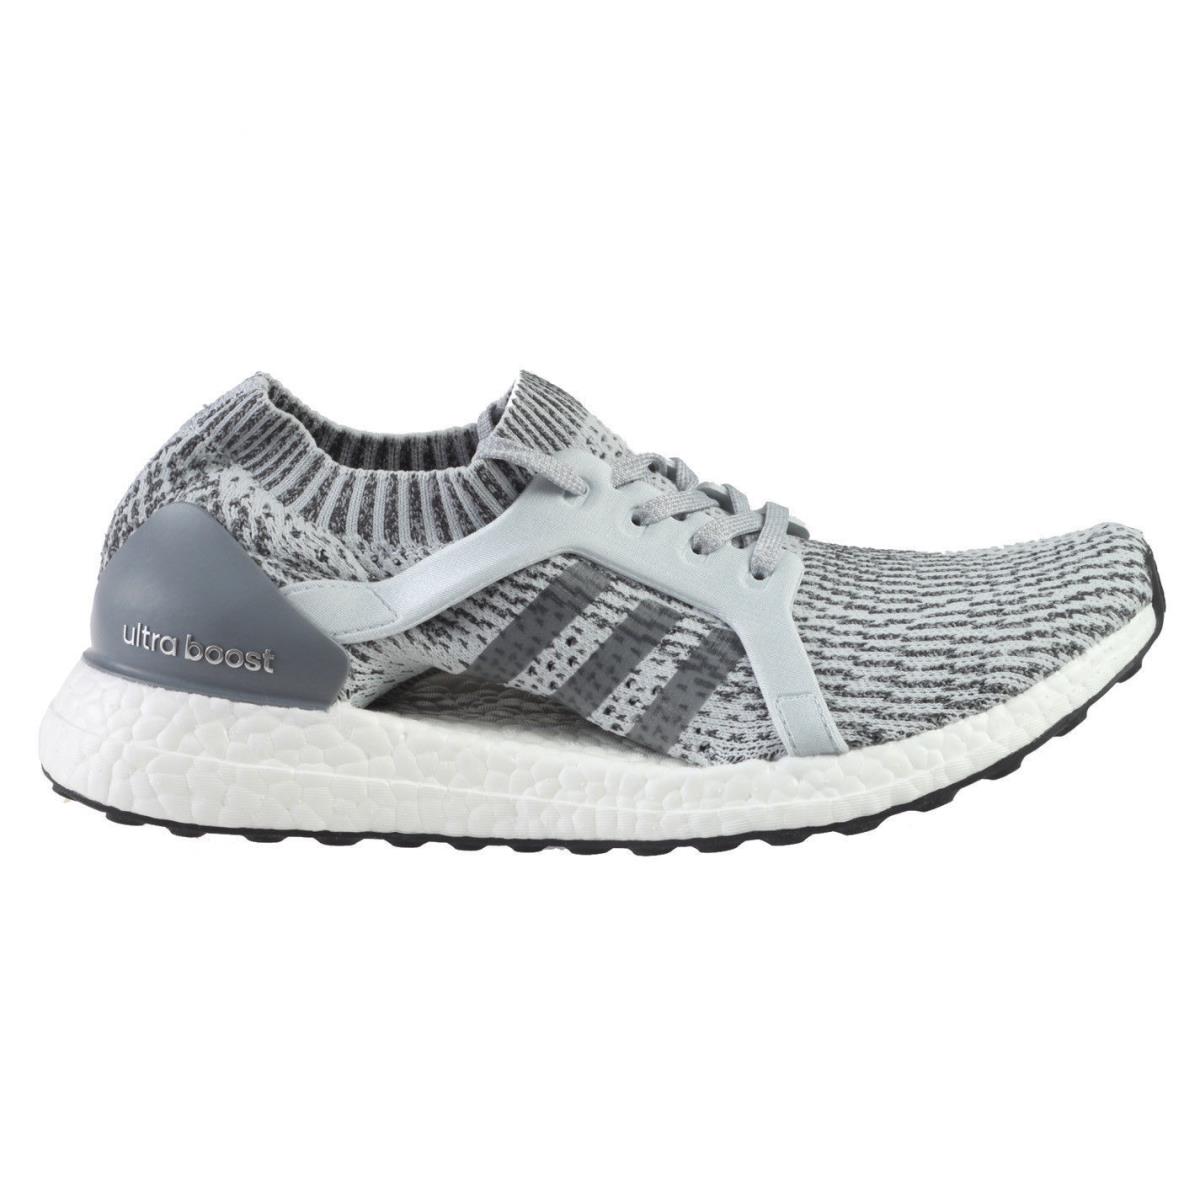 Adidas Ultraboost X Grey Silver Running Sneakers BB1695 635 Women`s Shoes - Grey /Silver